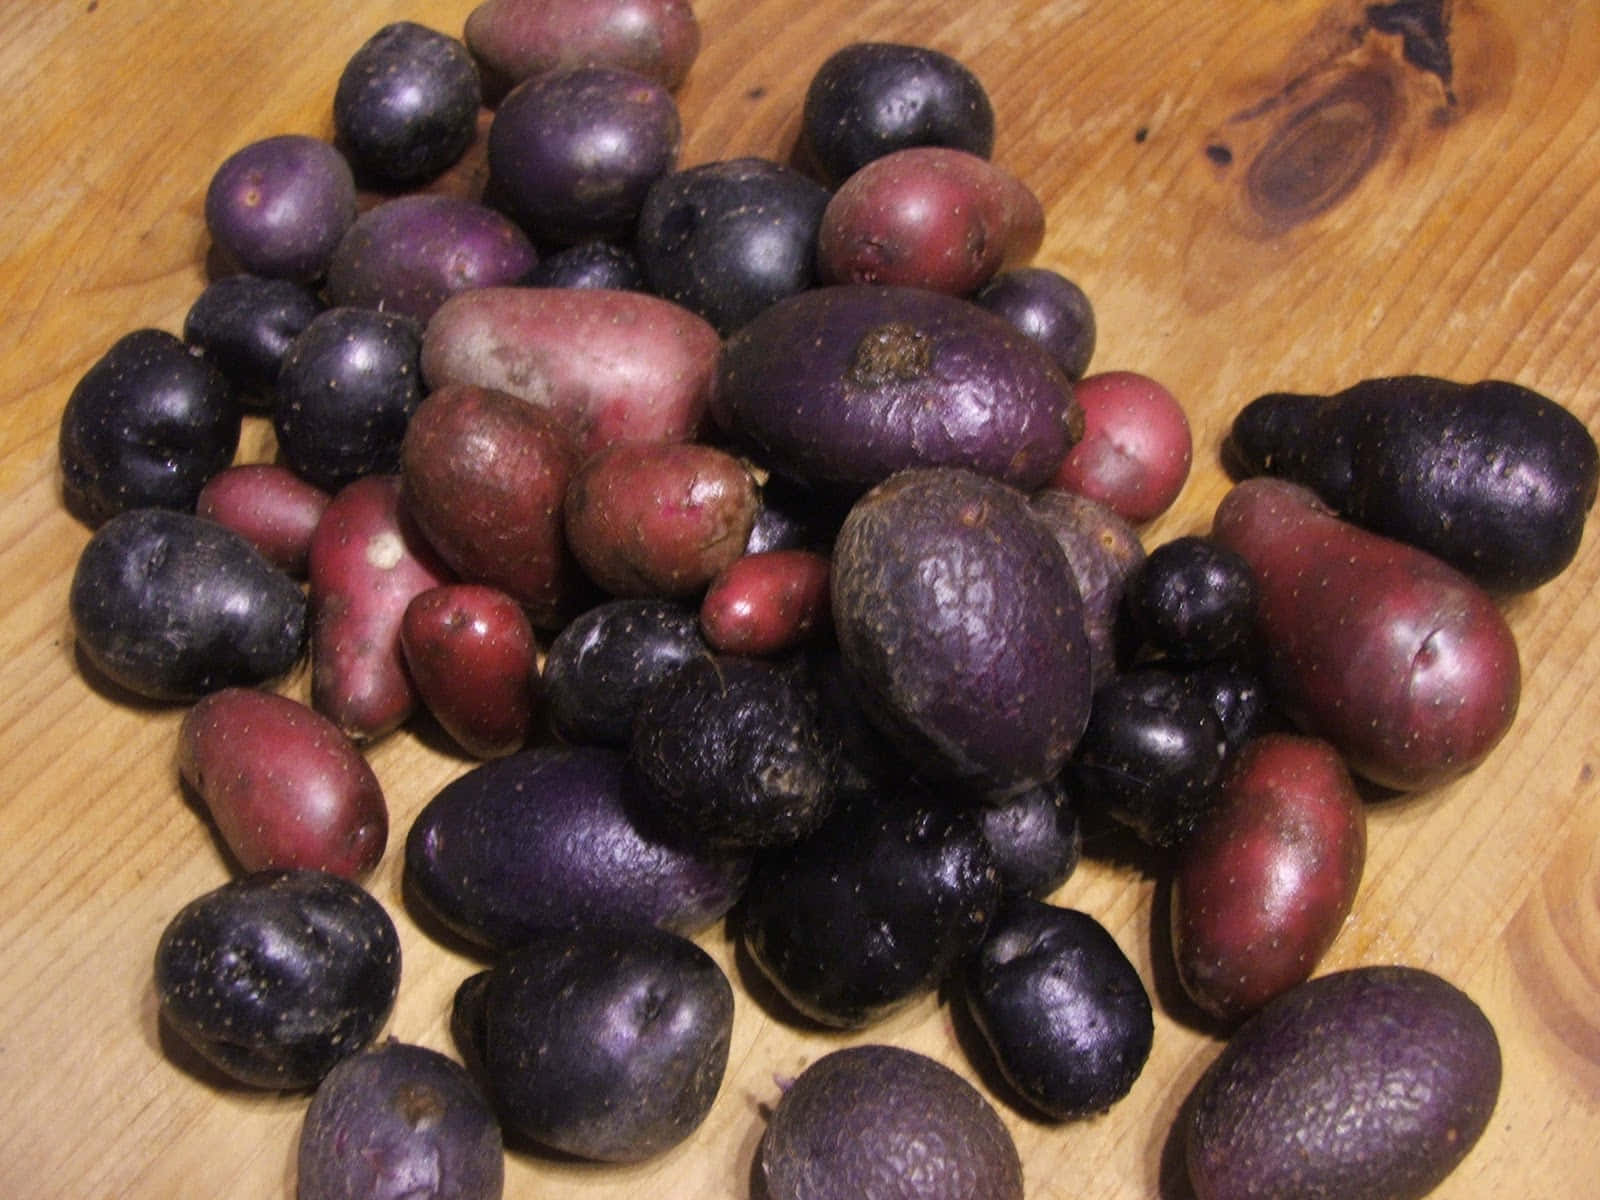 Experience the Aroma and Color of the Purple Potato Wallpaper